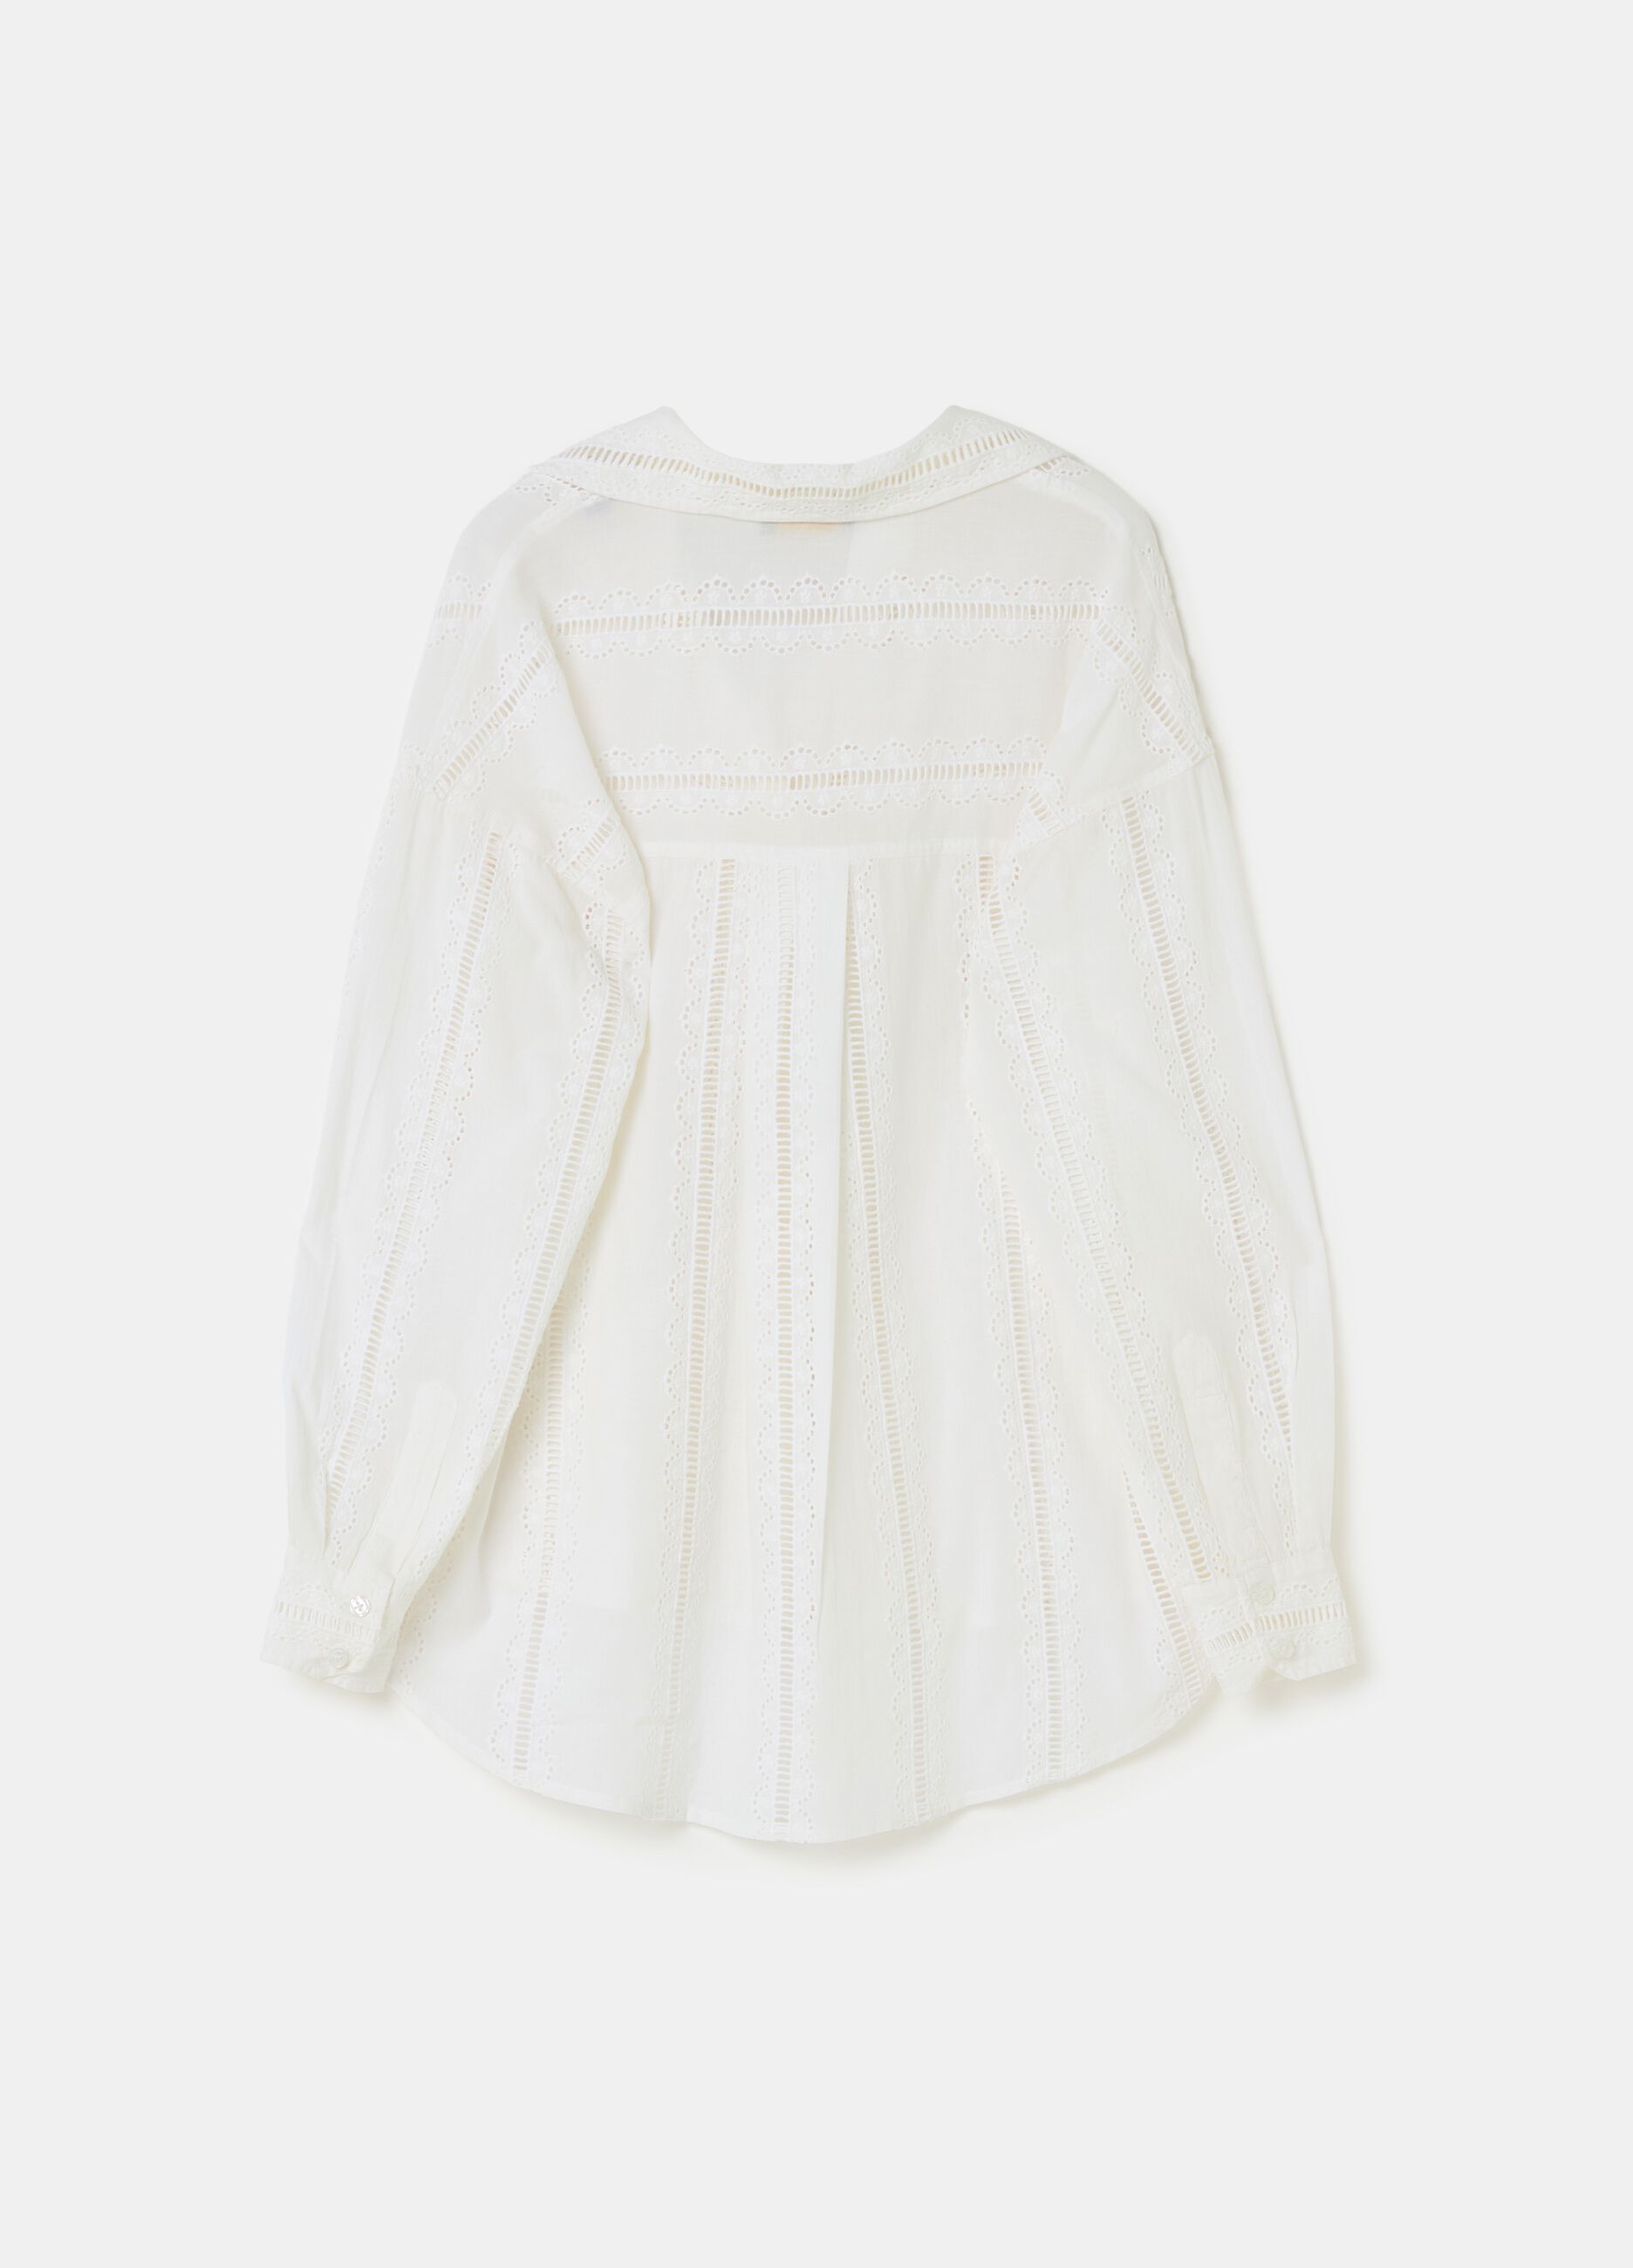 Oversized shirt with openwork details and broderie anglaise